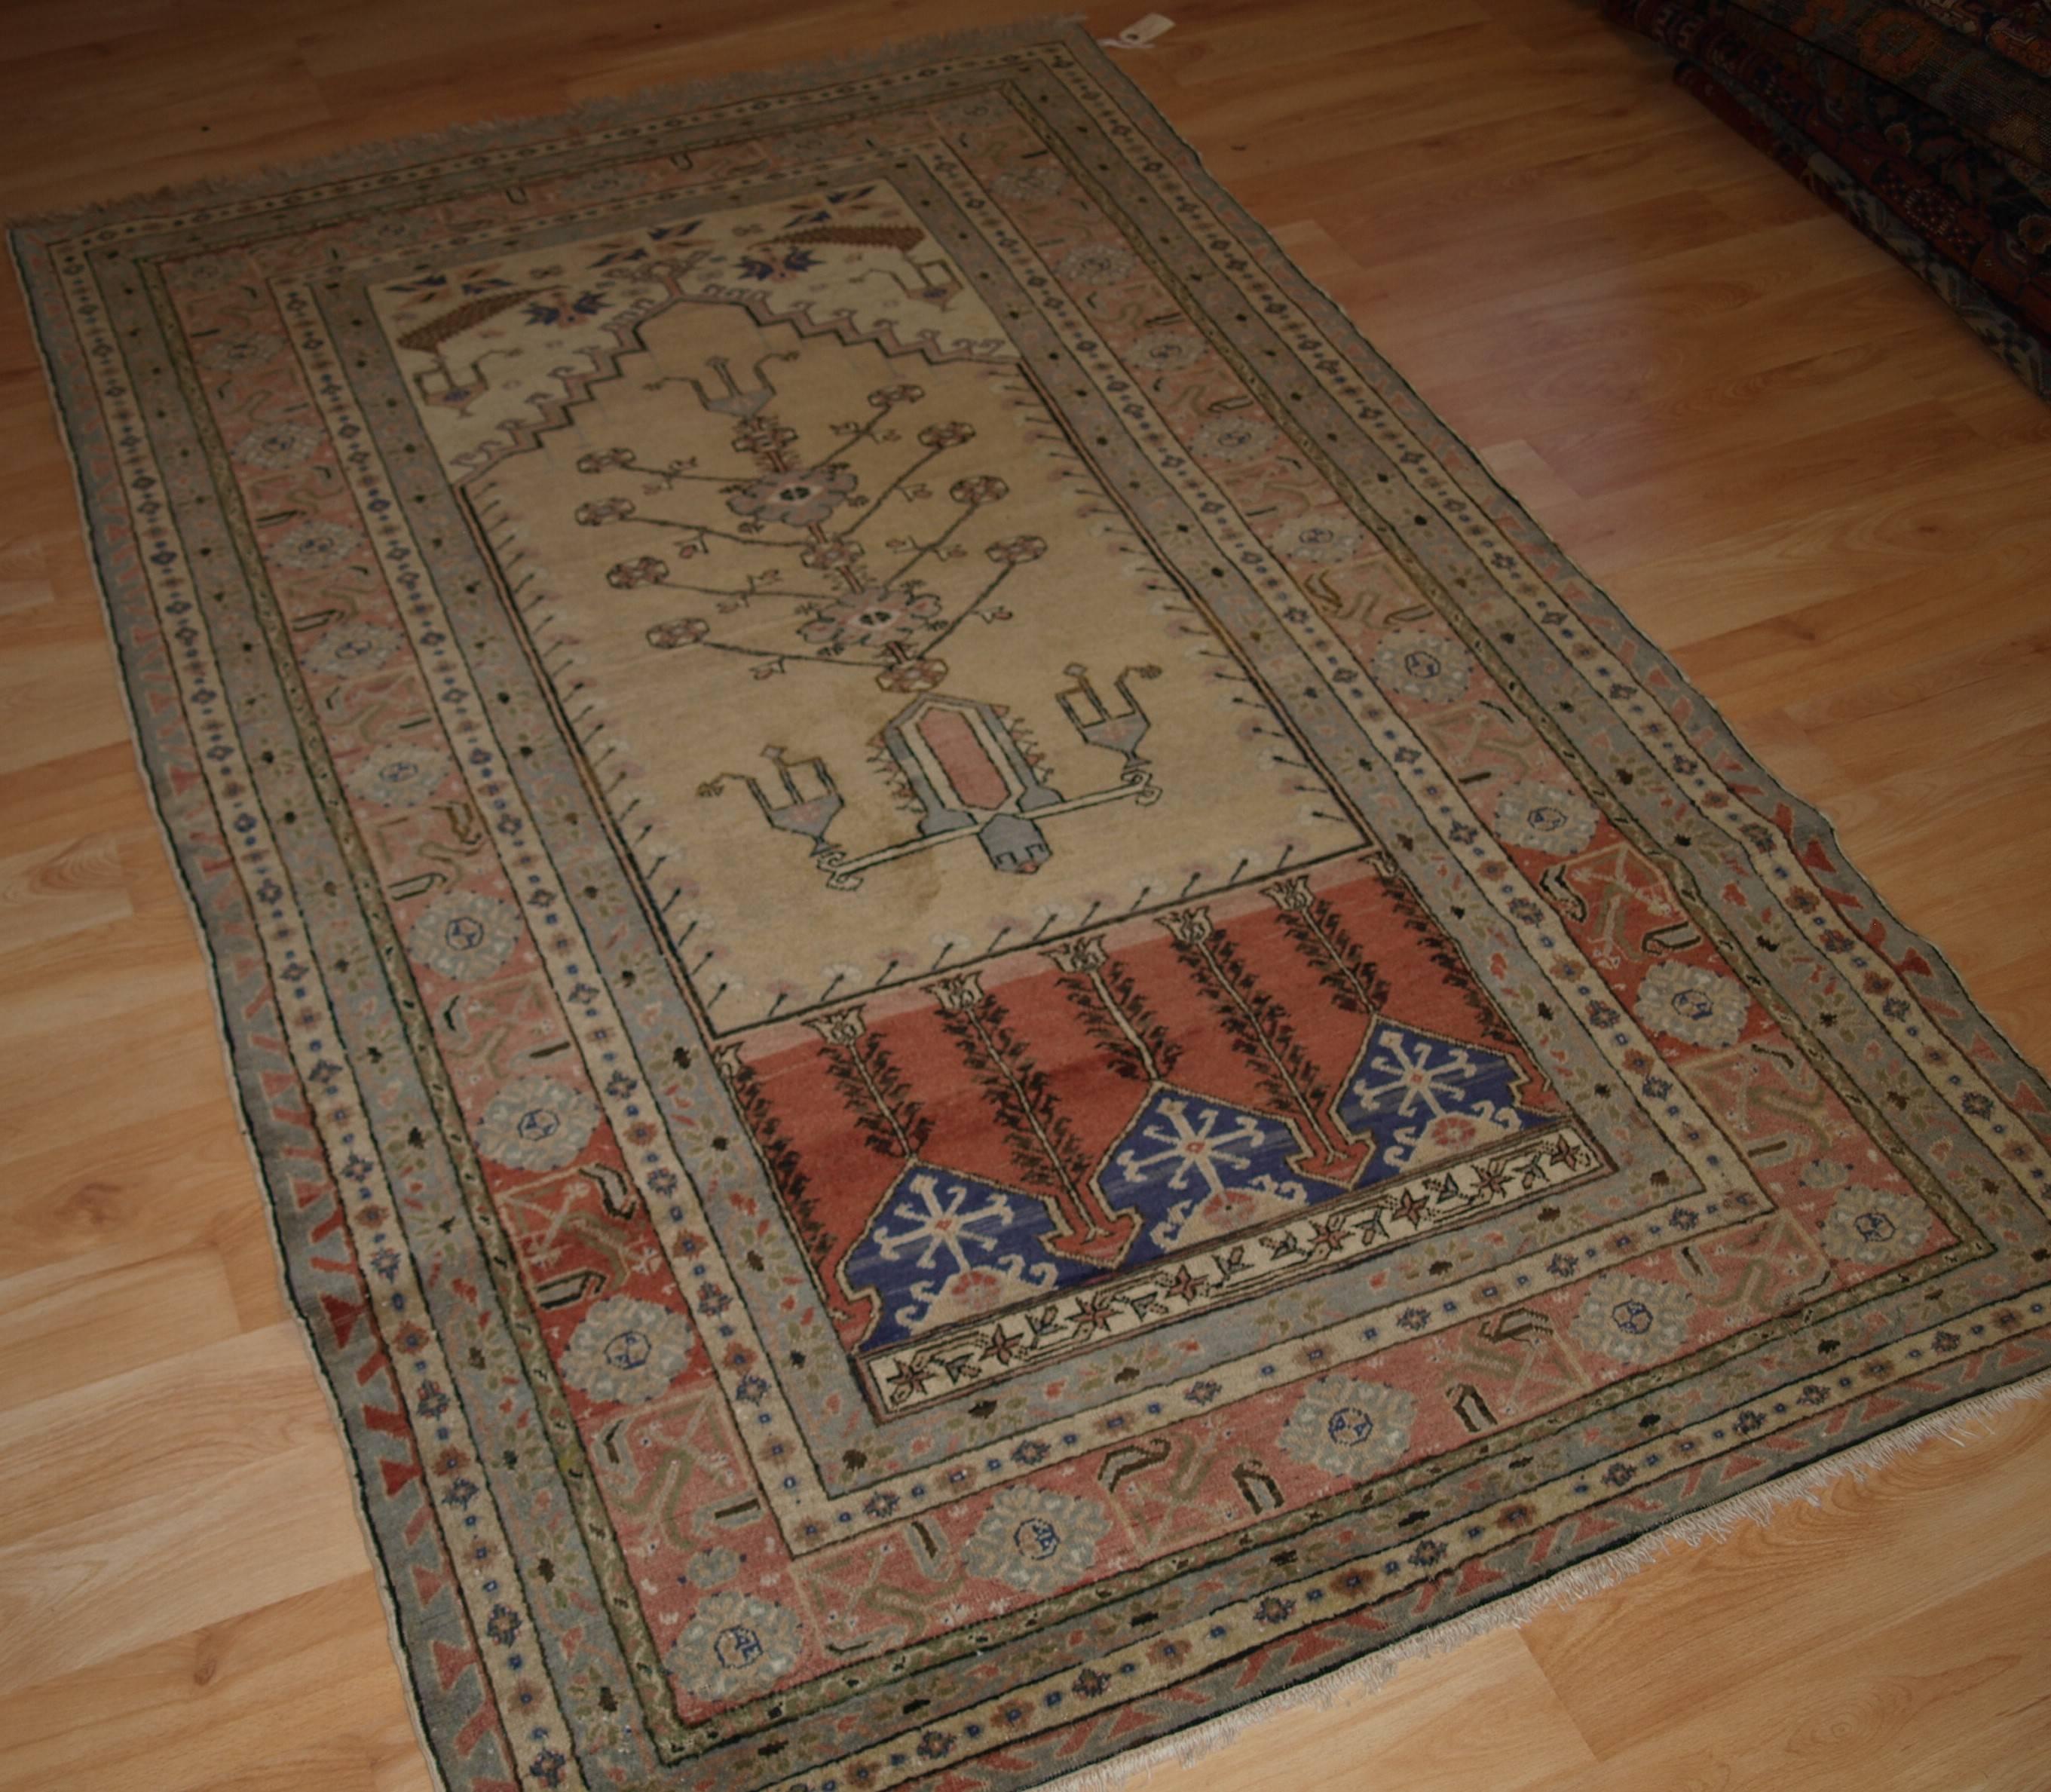 Antique Turkish Kayseri prayer rug, Ladik prayer design, circa 1900-1920.
Size: 6ft 0in x 3ft 11in (183 x 120cm).

Antique Turkish Kayseri prayer rug of traditional Ladik design with superb soft pastel colors,

circa 1900-1920.

The rug is in